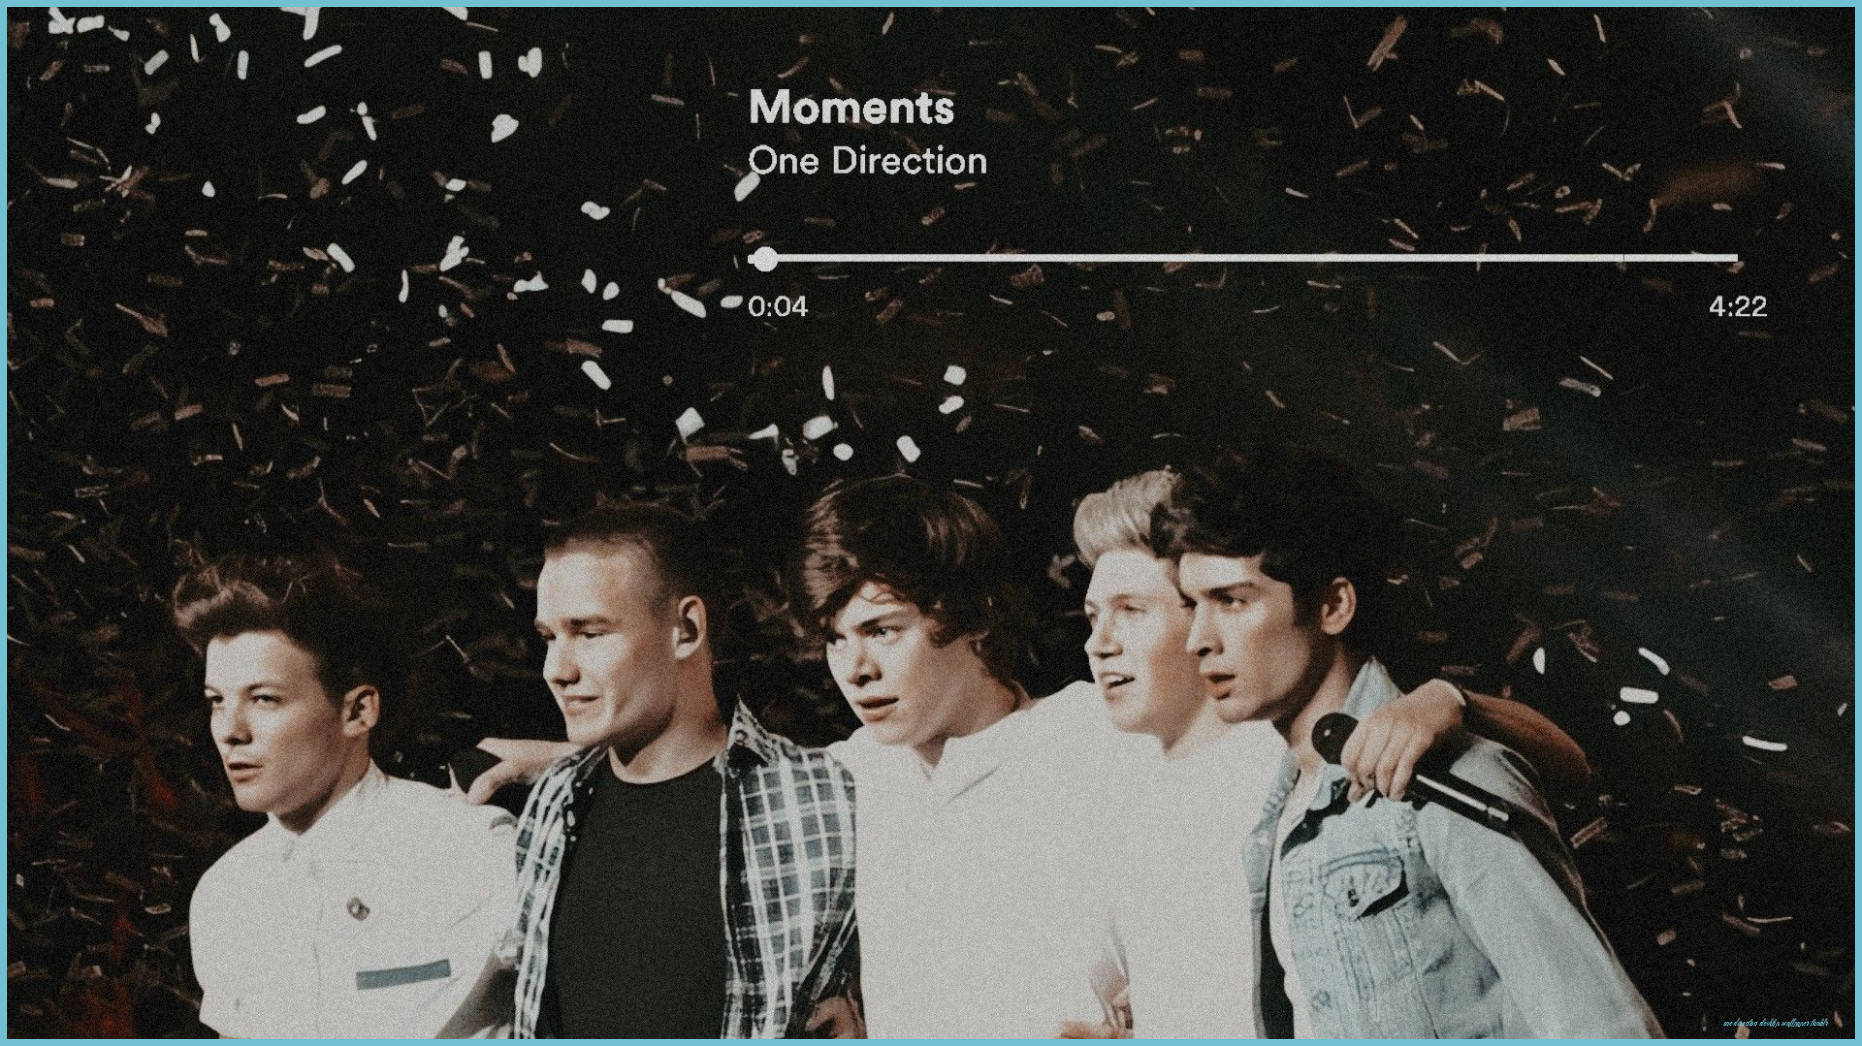 A screen grab of the One Direction website with the band members standing together. - One Direction